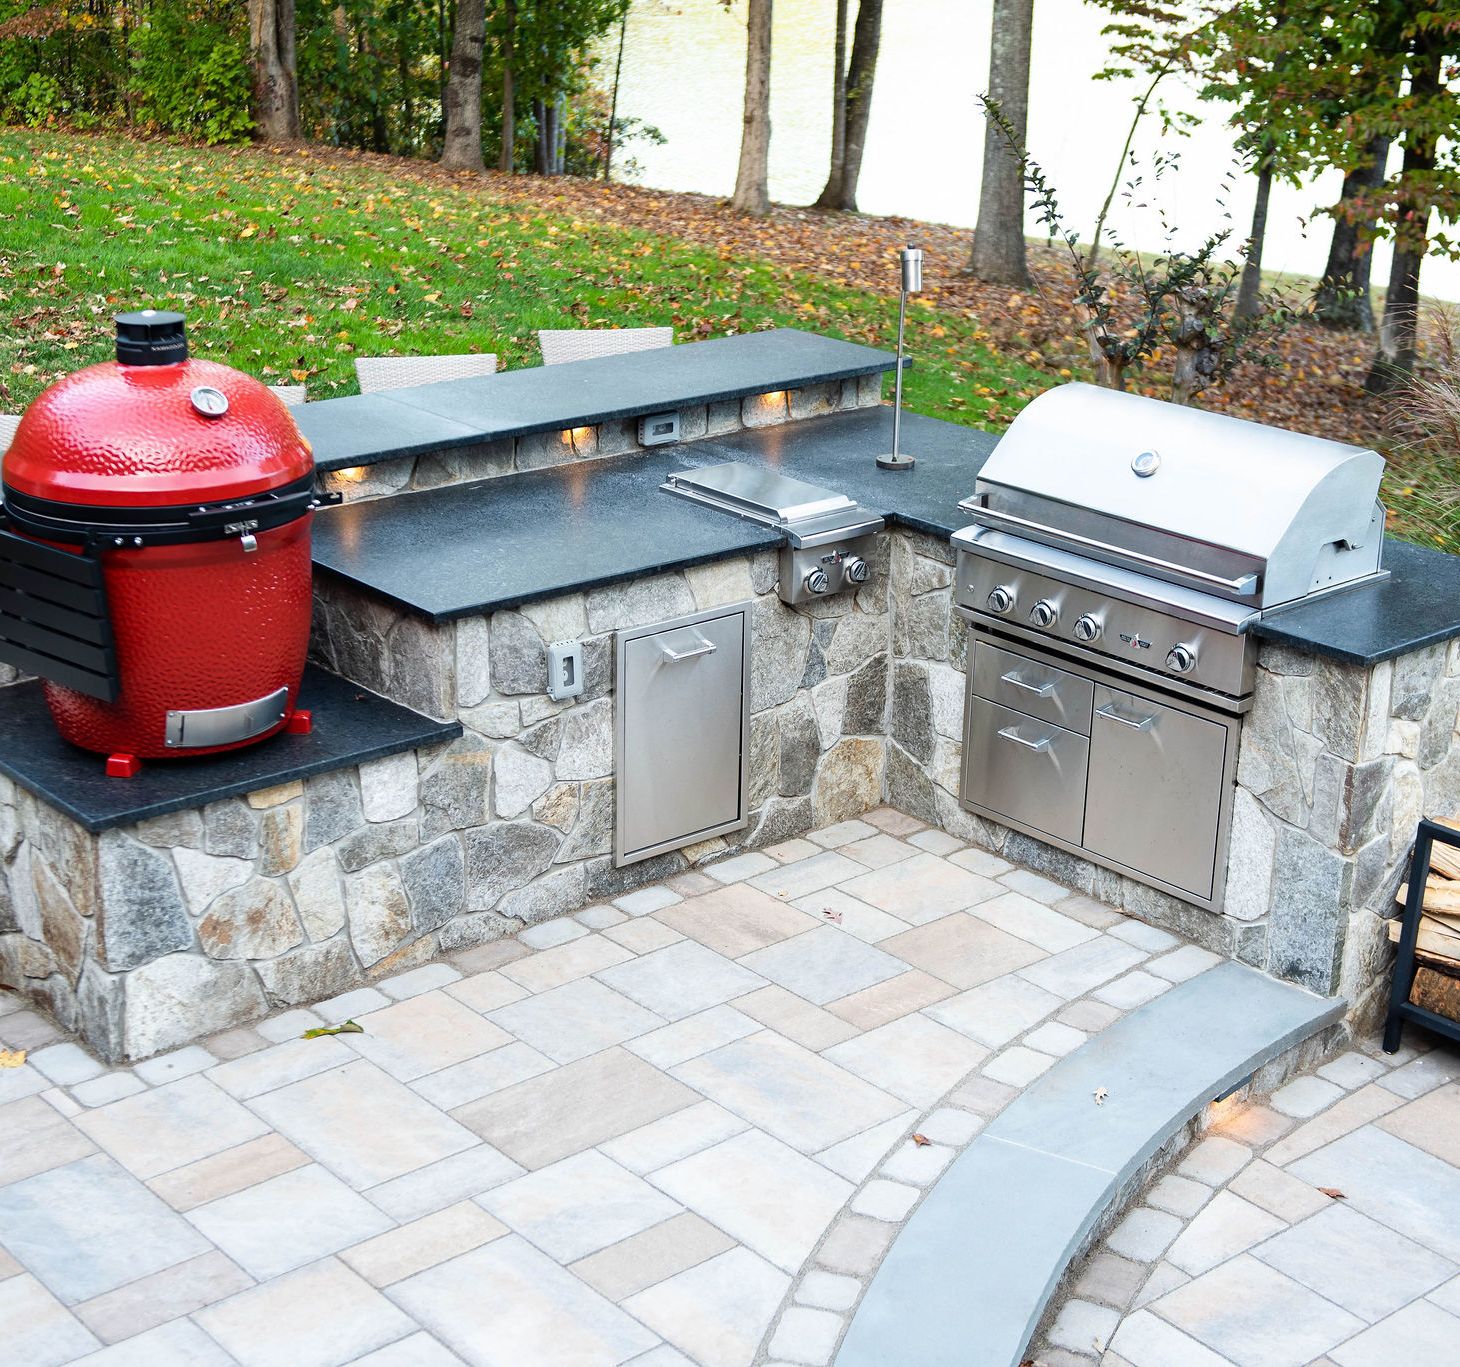 BBQ Grills, Smokers & Outdoor Kitchens  Transform Your Backyard 